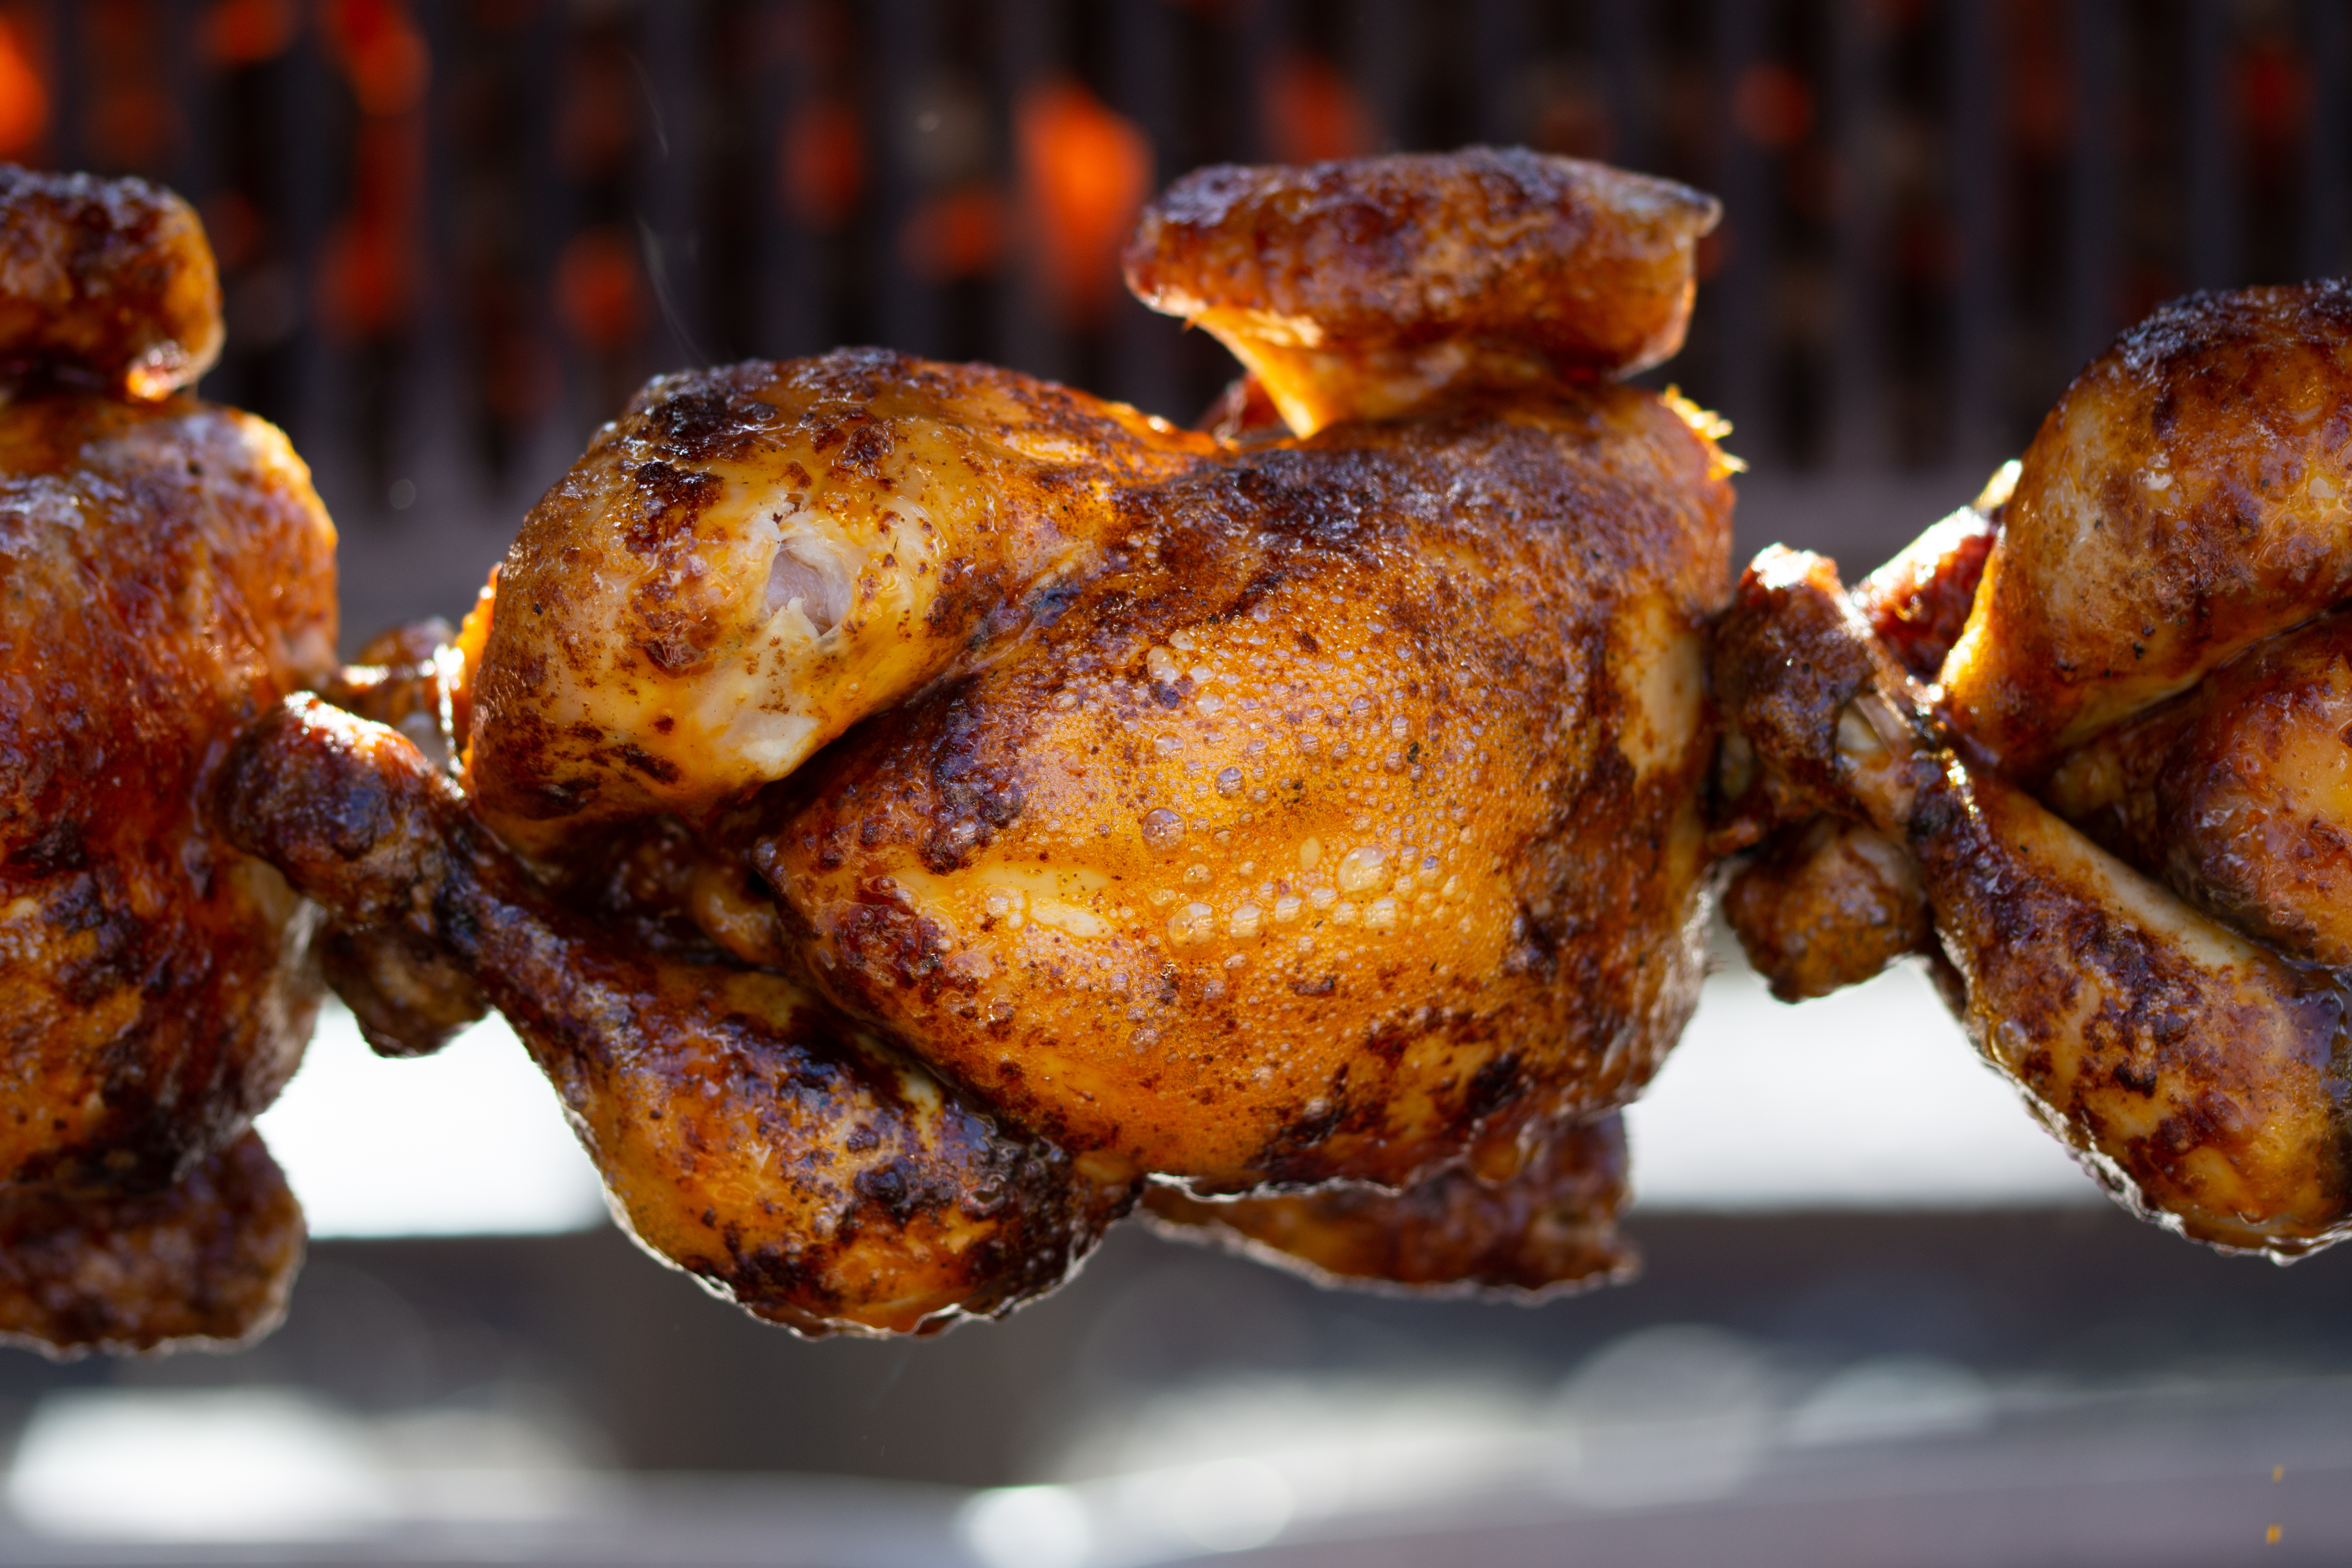 A rotisserie chicken on a spit between two other rotisserie chickens